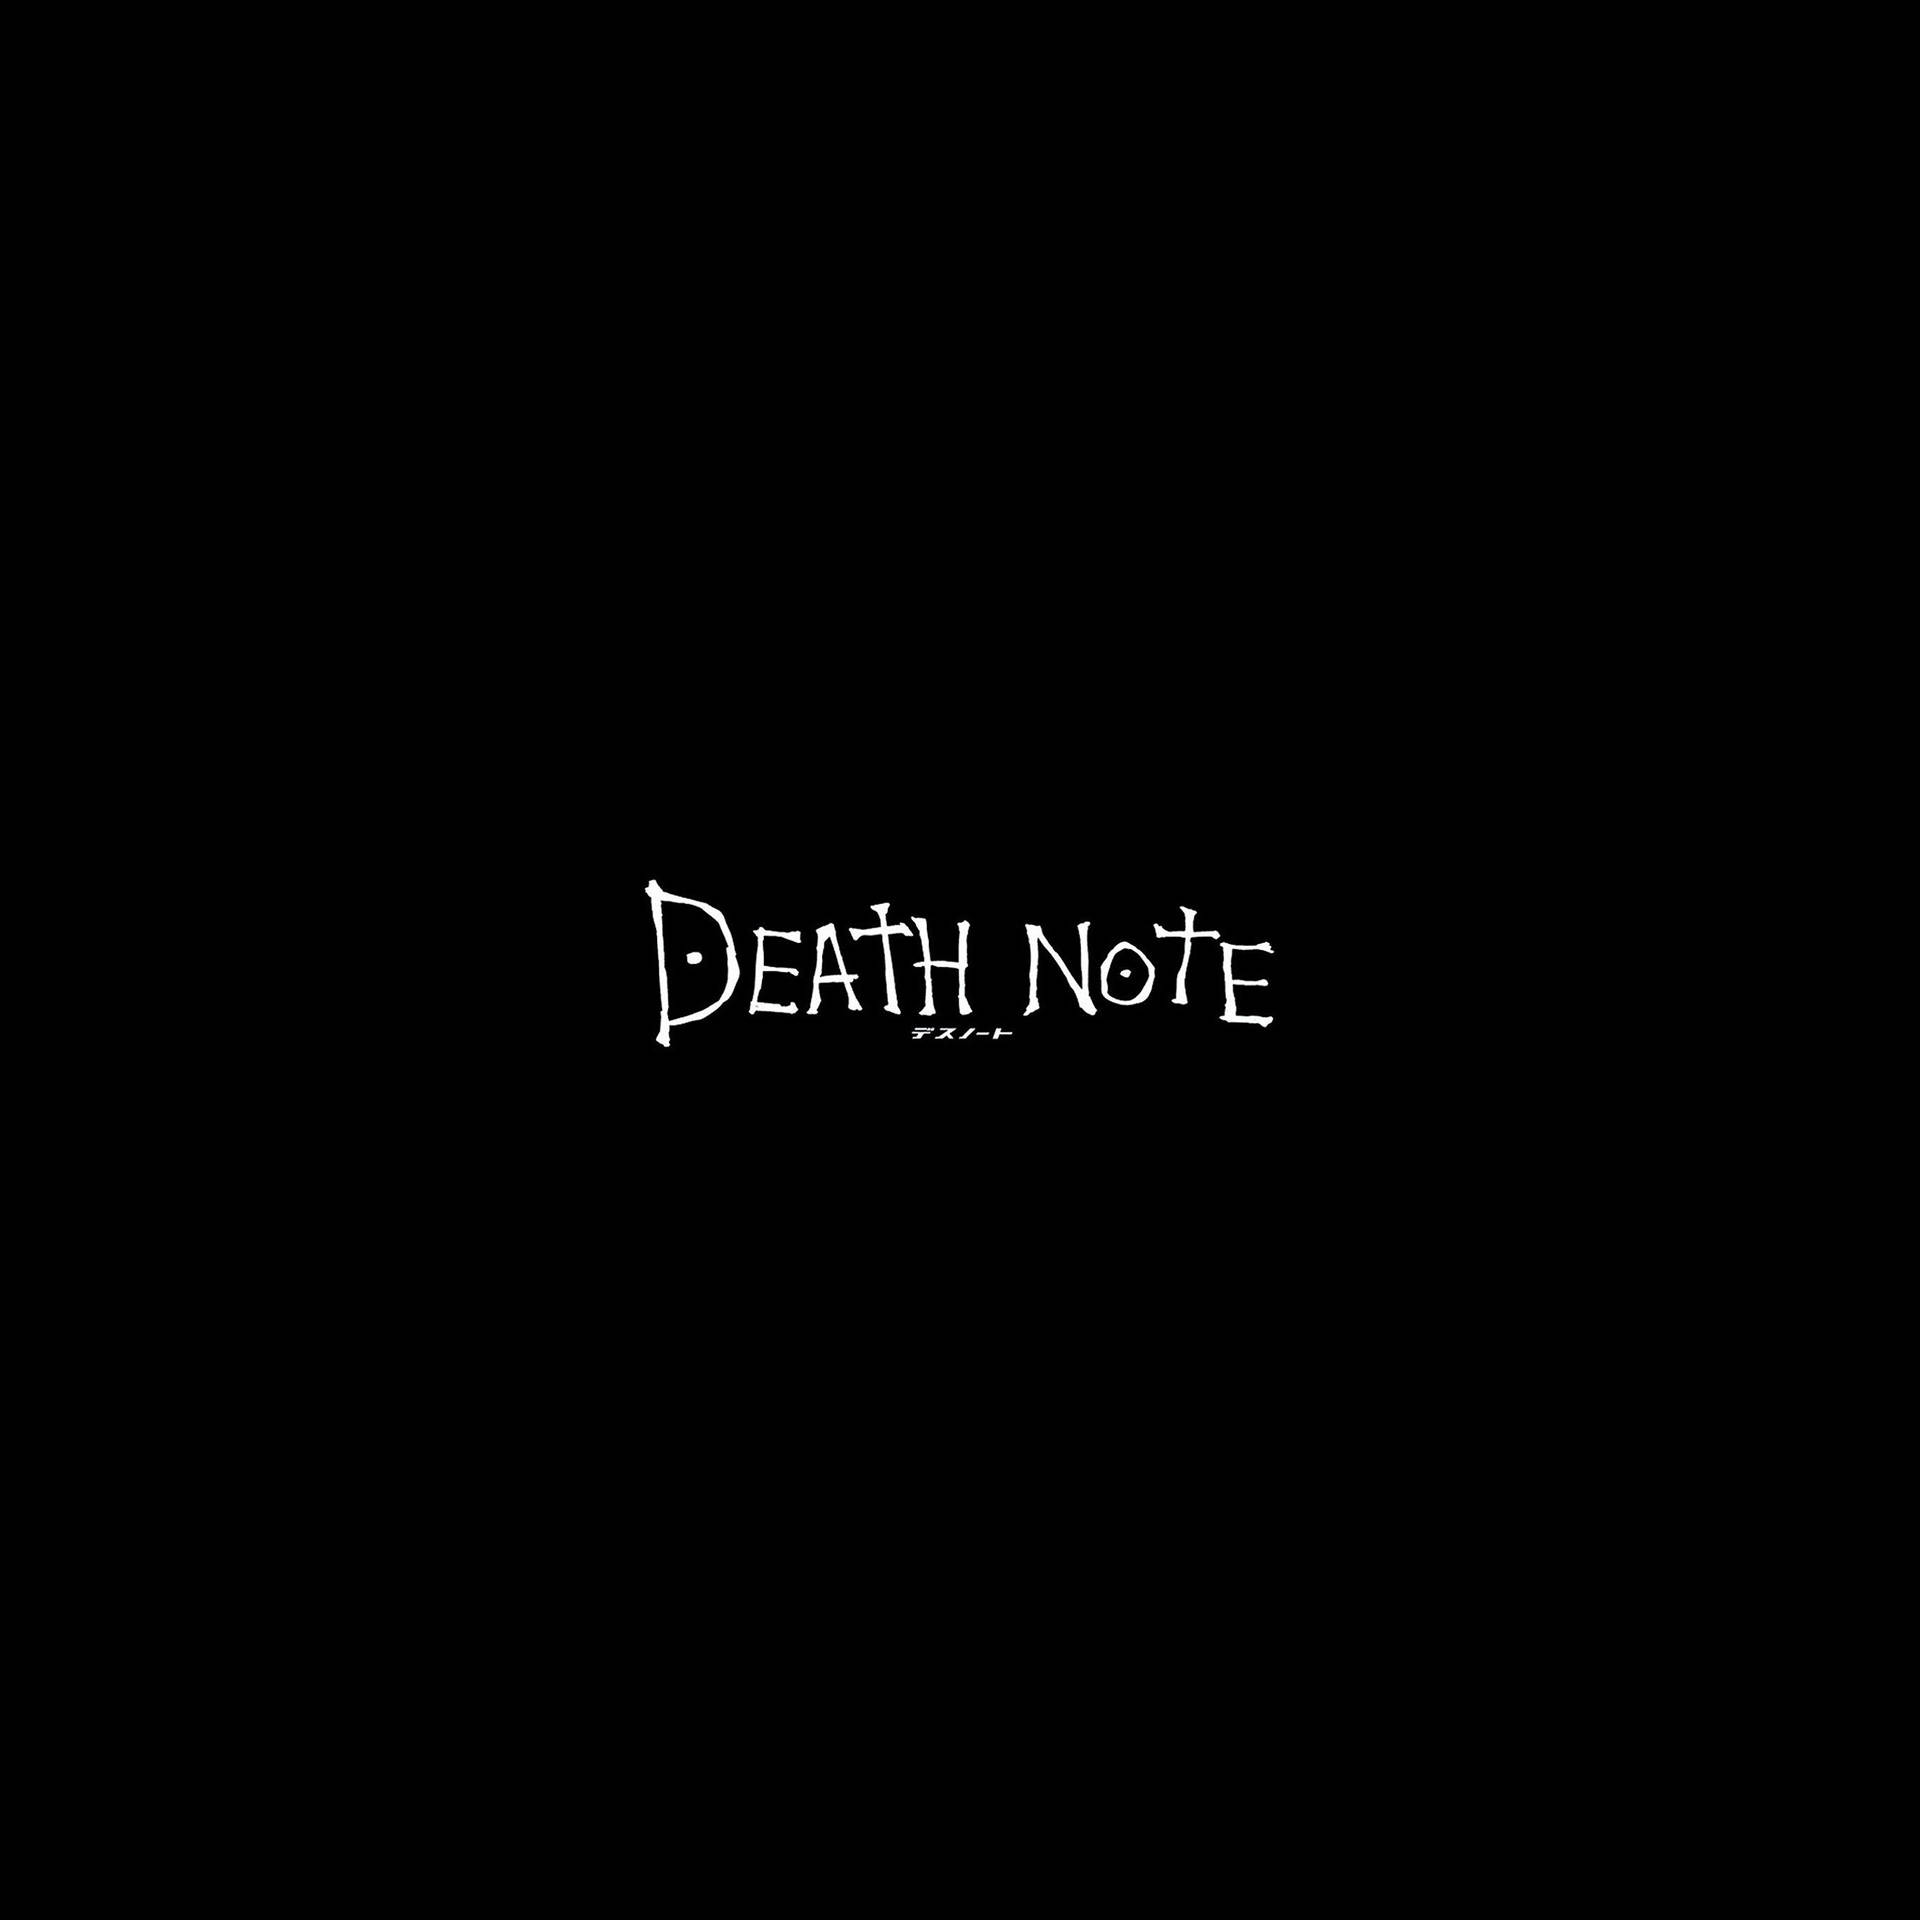 Death Note Minimalism Cover